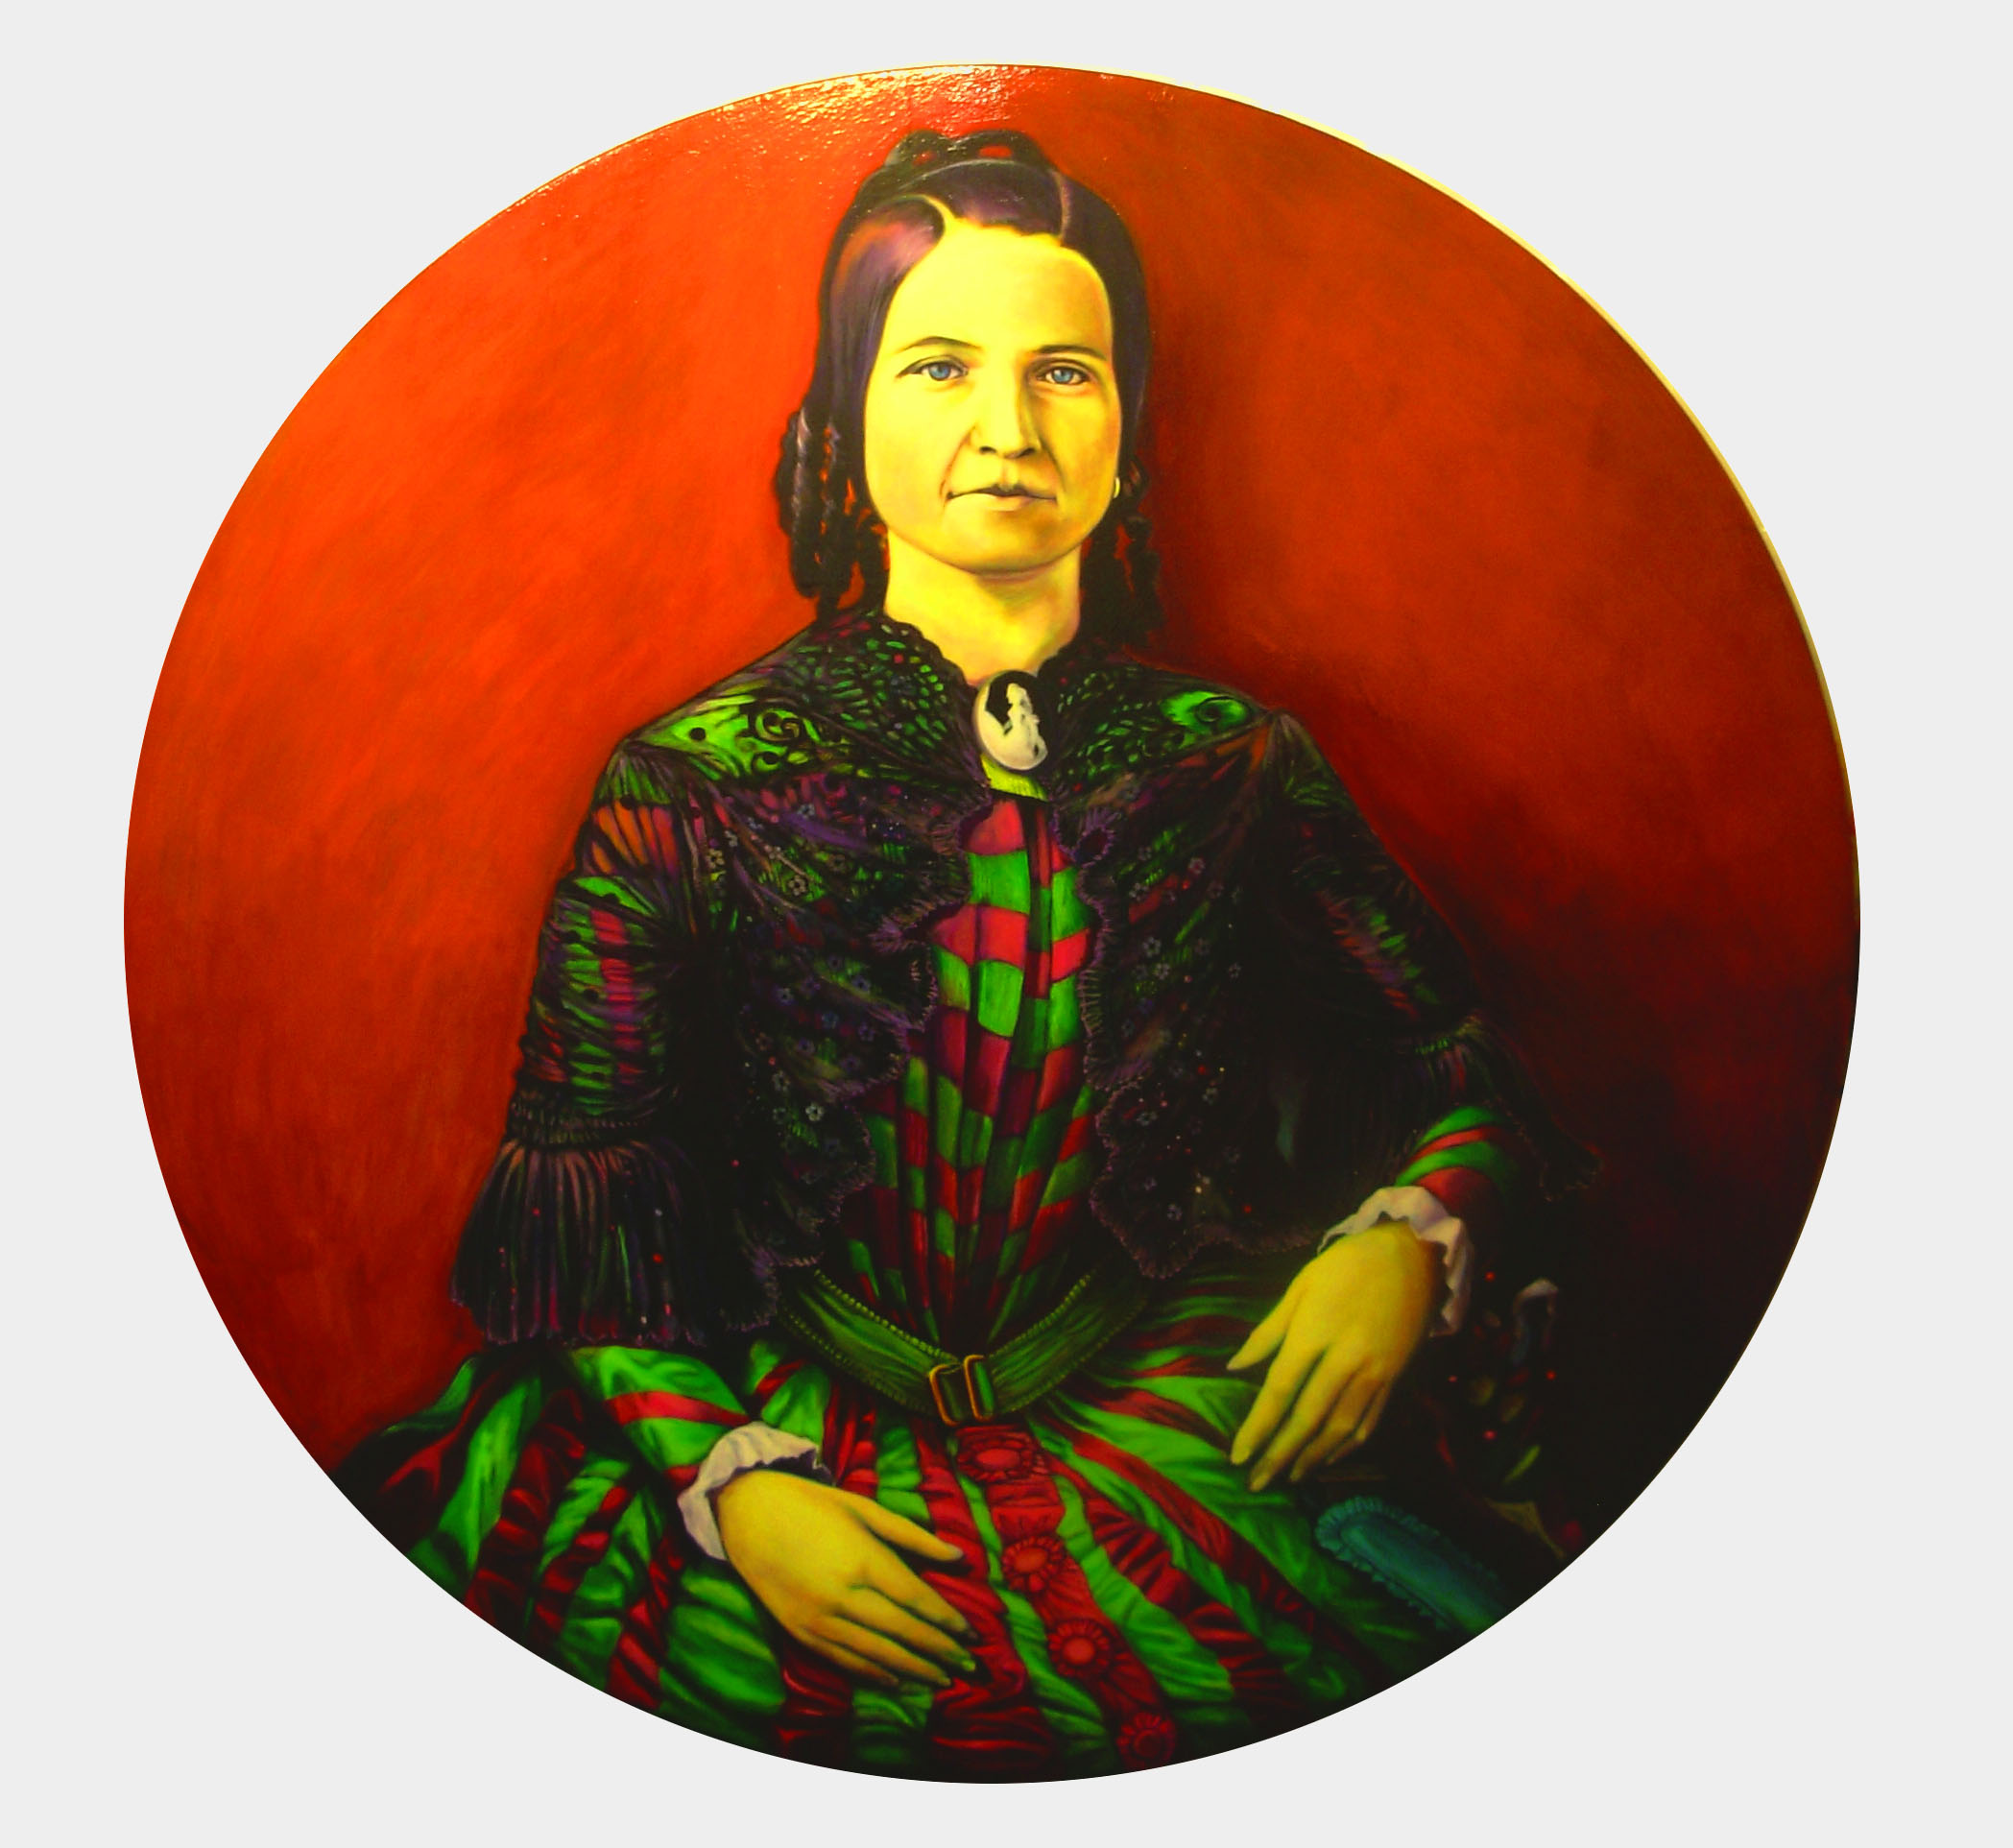  "Mary Todd Lincoln", fluorescent paint on canvas &nbsp;48"round - 2012 